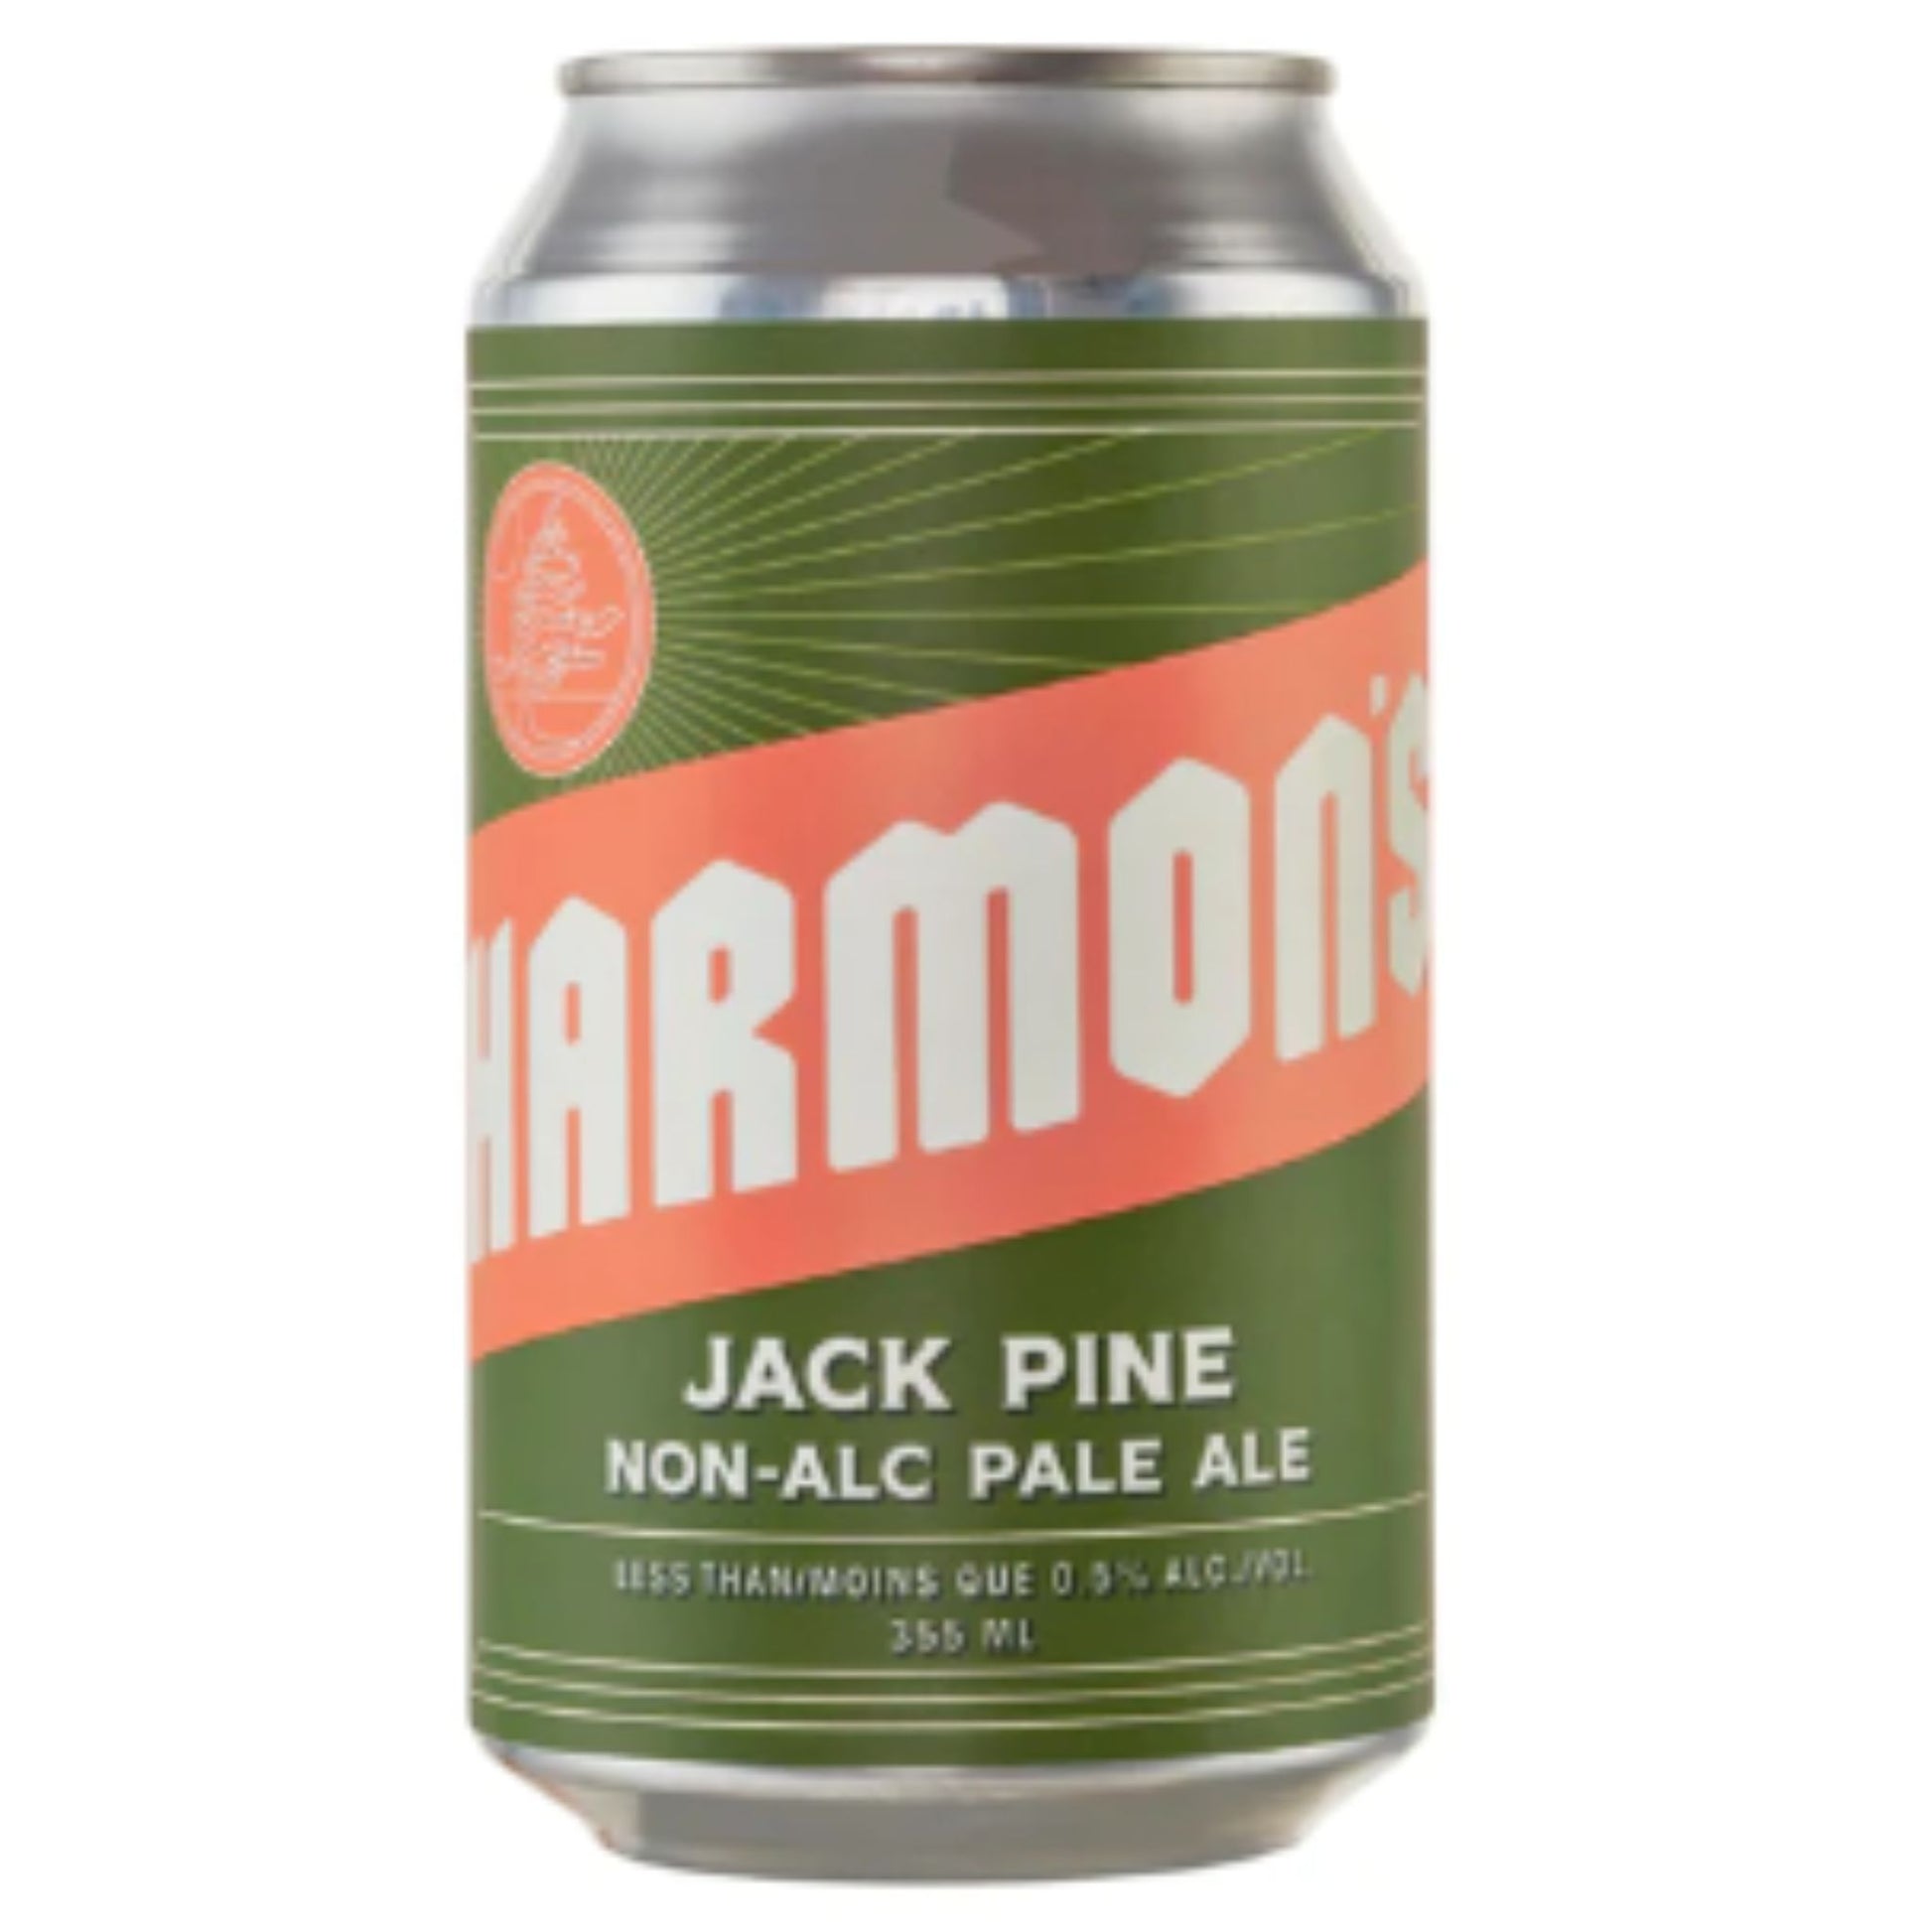 Harmon's Jack Pine Pale Ale is available for purchase from Knyota Drinks in Ottawa.